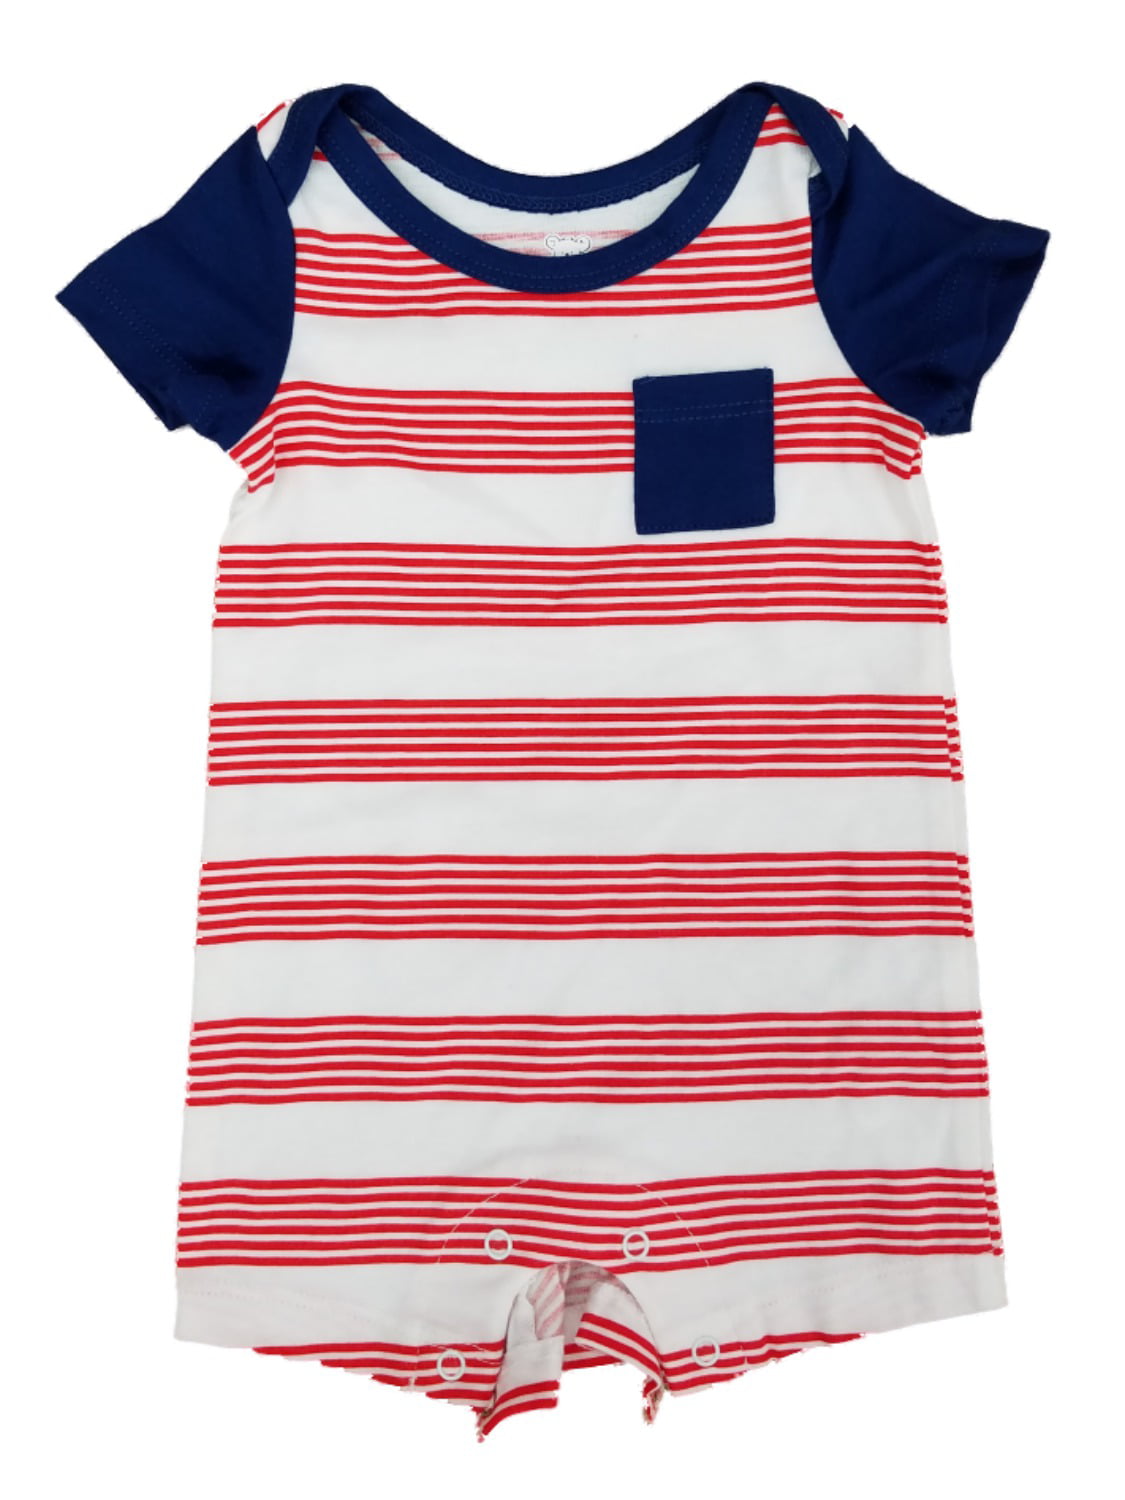 Infant Red White Blue and Miller Lite Too Adorable Soft Music Band Jersey Baby Romper,Black,12M 